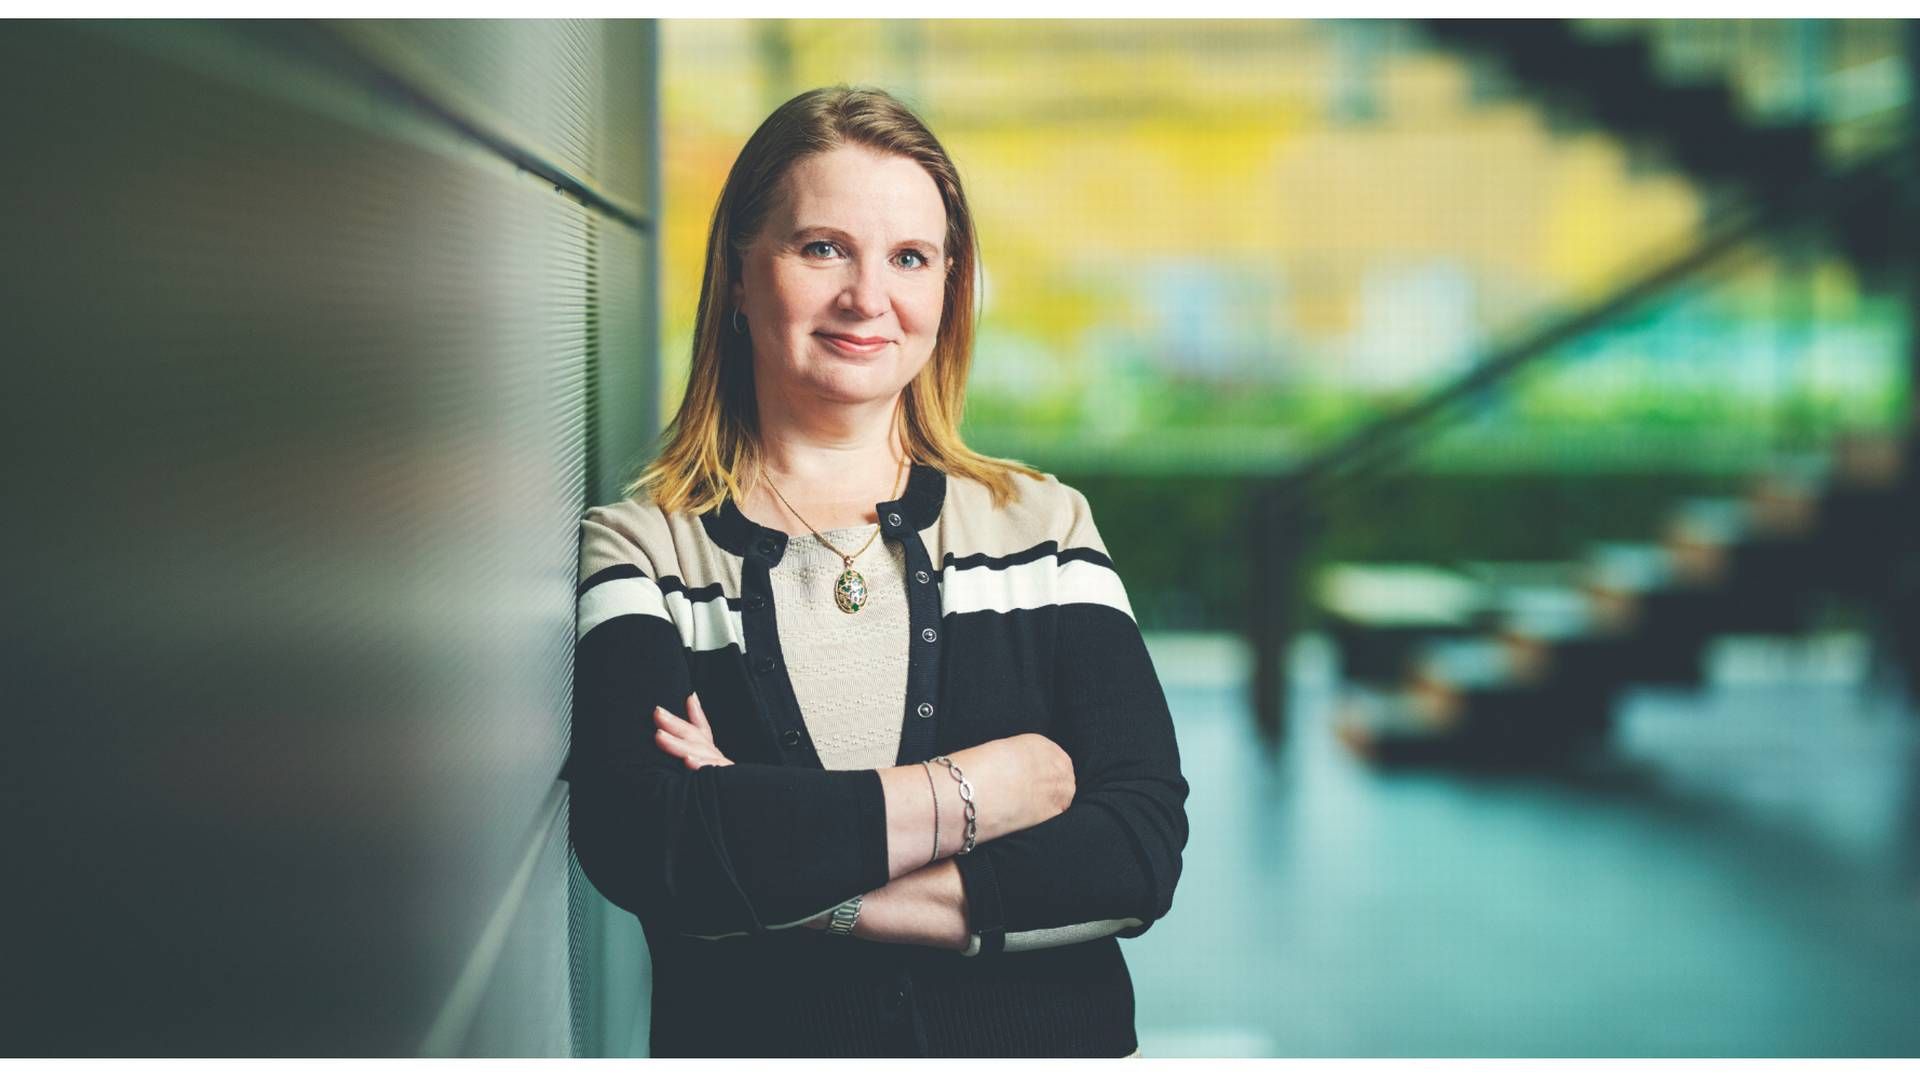 Anna Hyrske, Principal Responsible Investment Specialist at Bank of Finland. | Photo: Lauri Rotko.